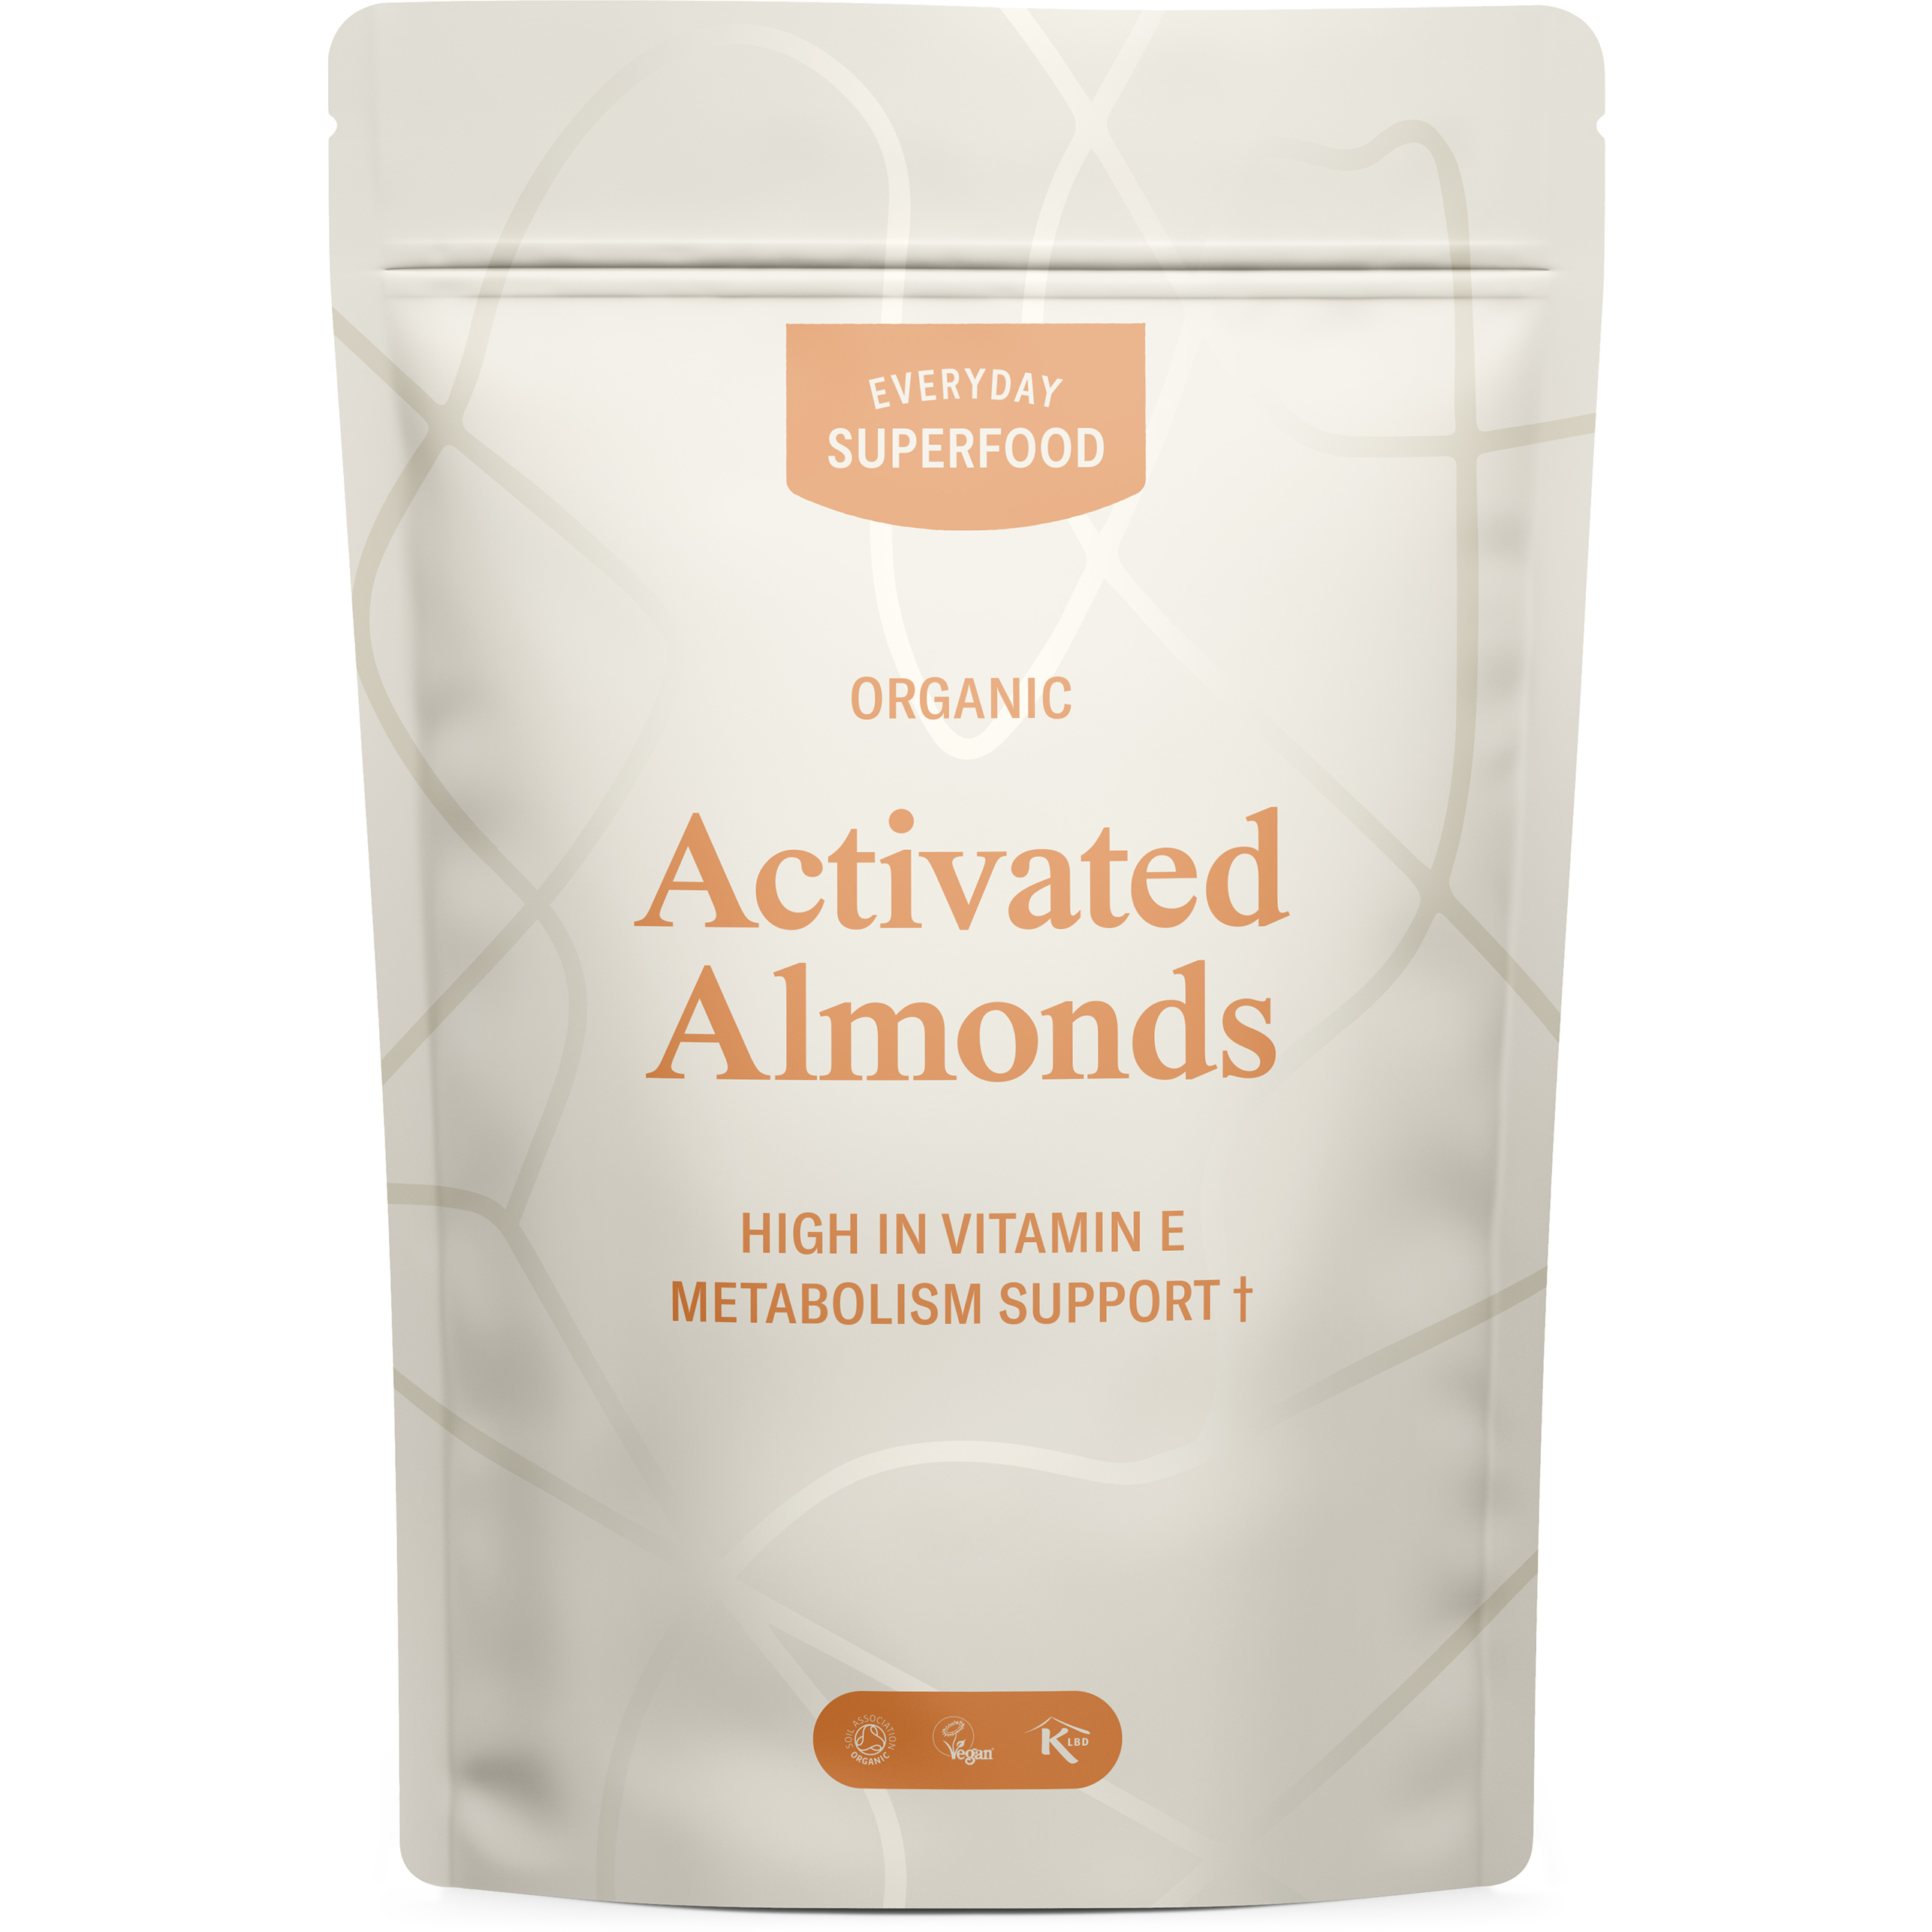 Activated Organic Almonds